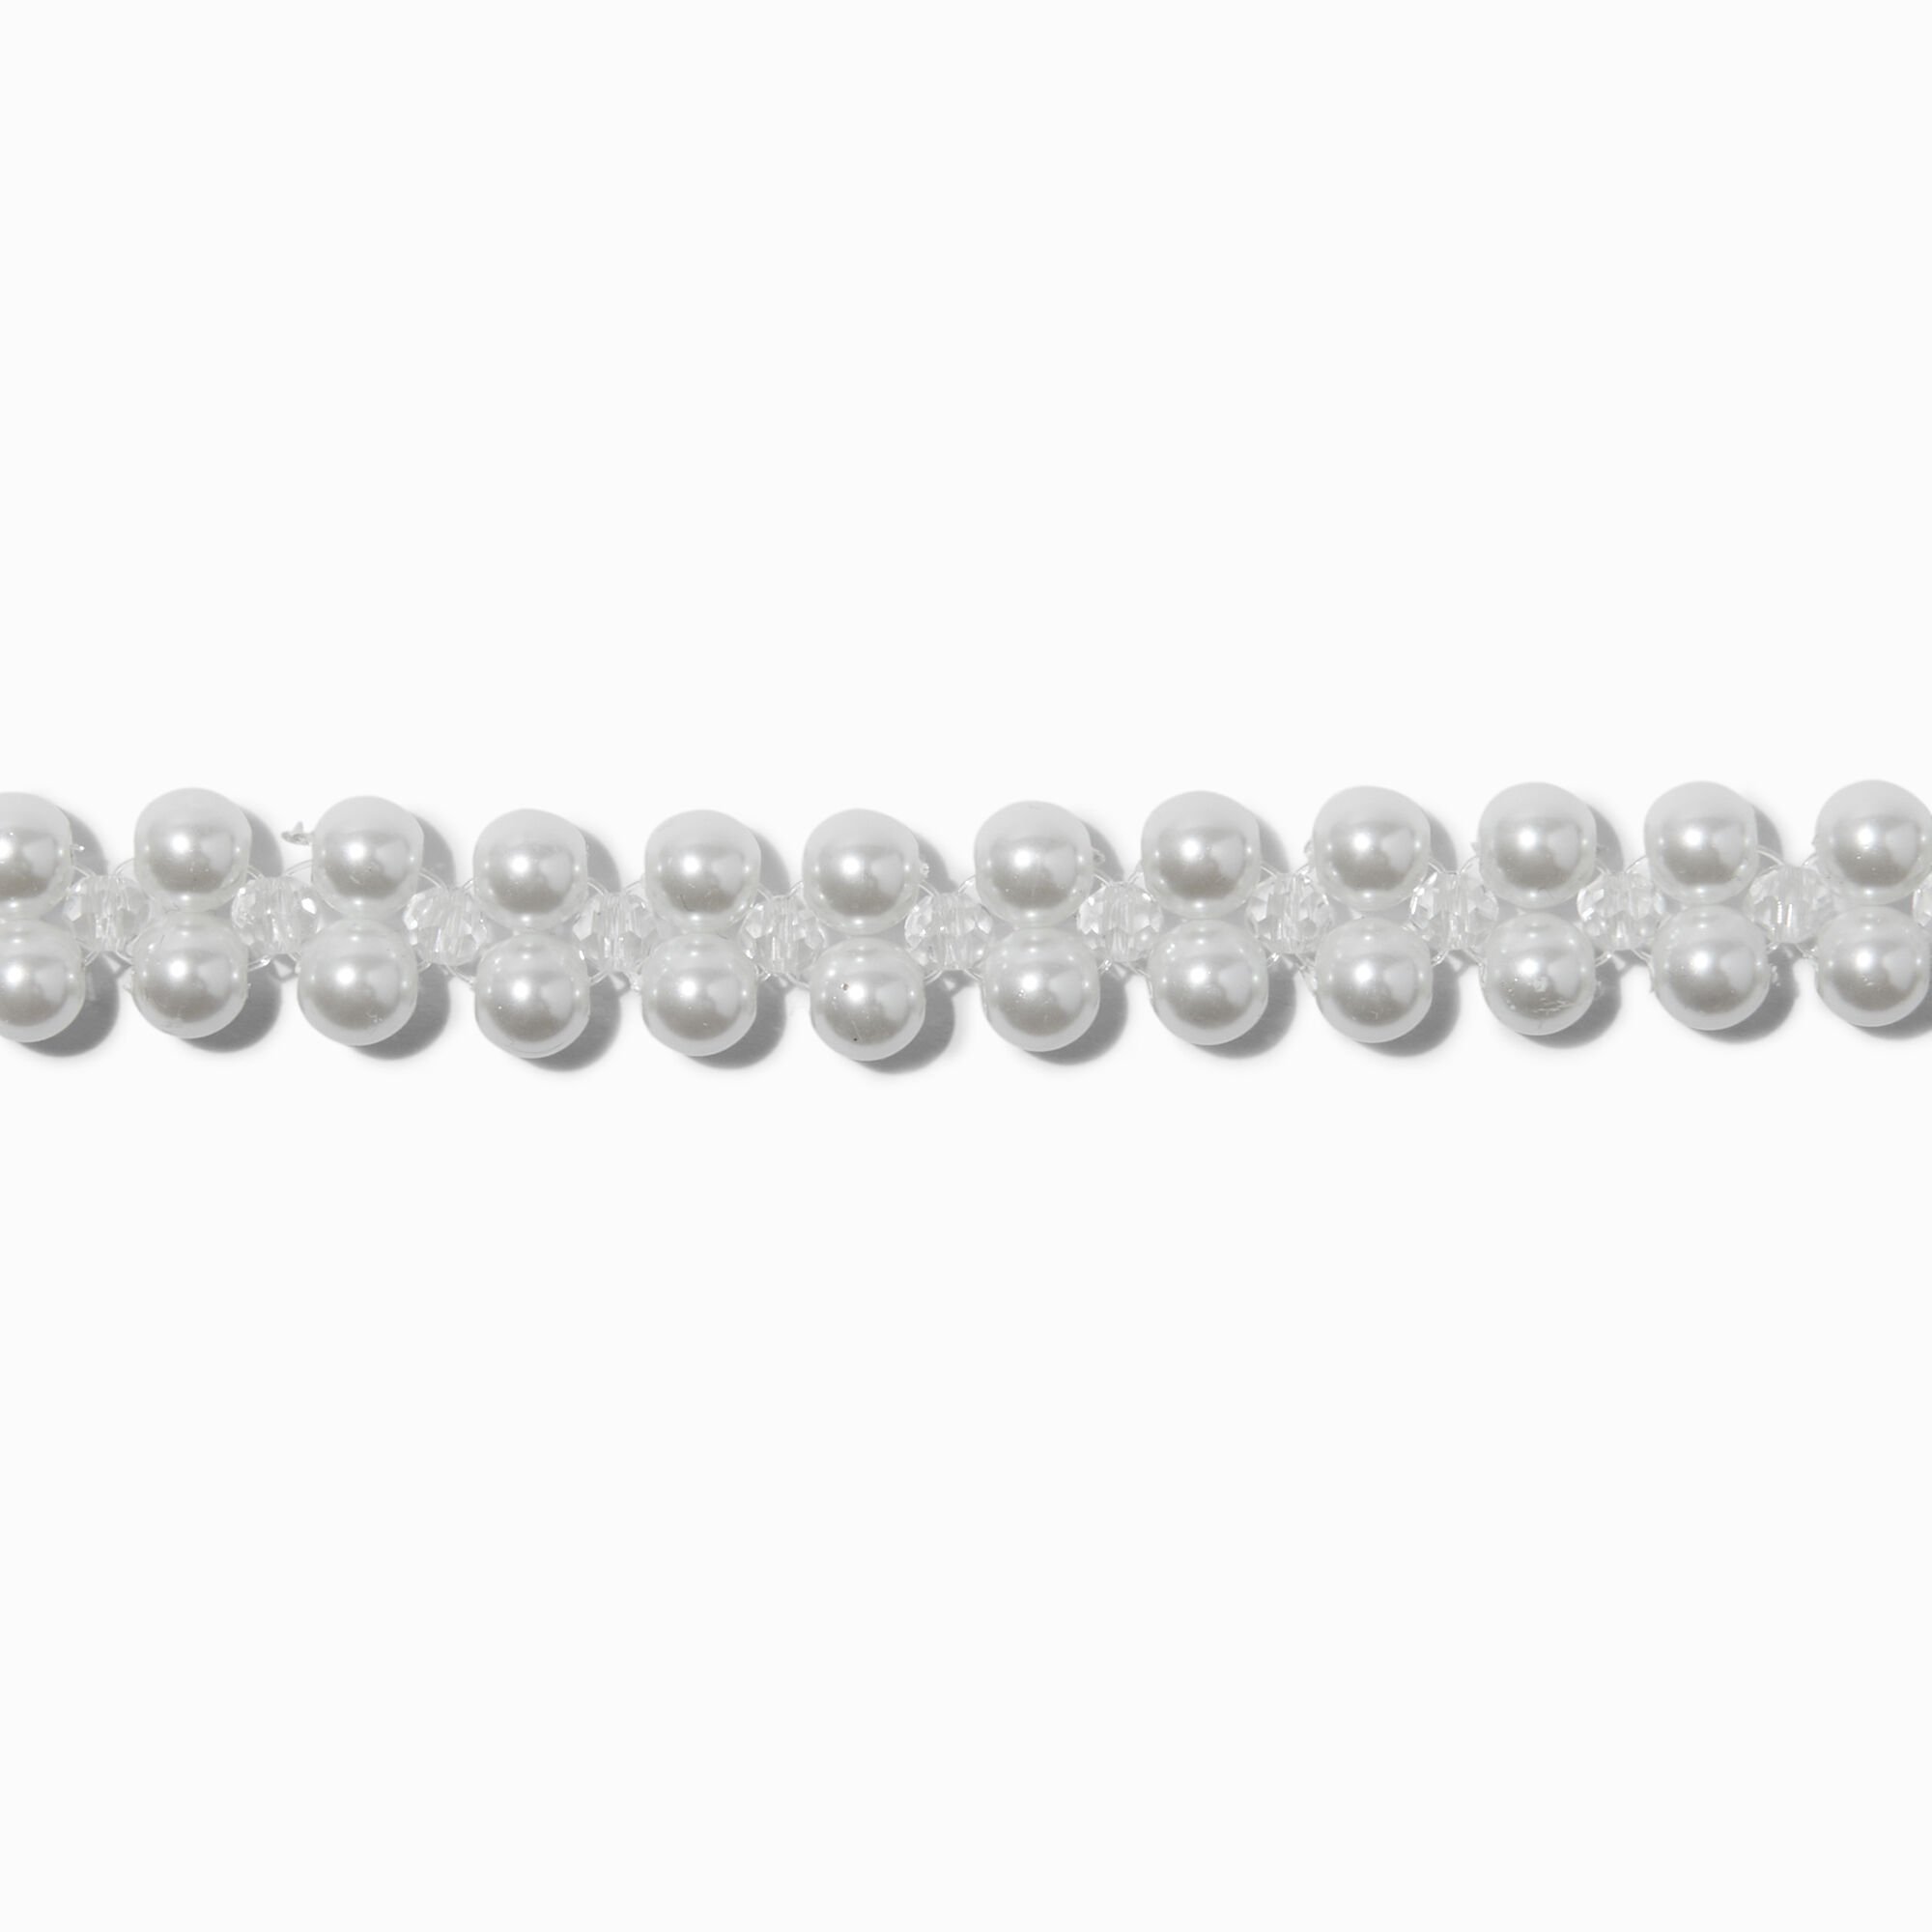 View Claires Tone Double Row Pearl Choker Necklace Silver information